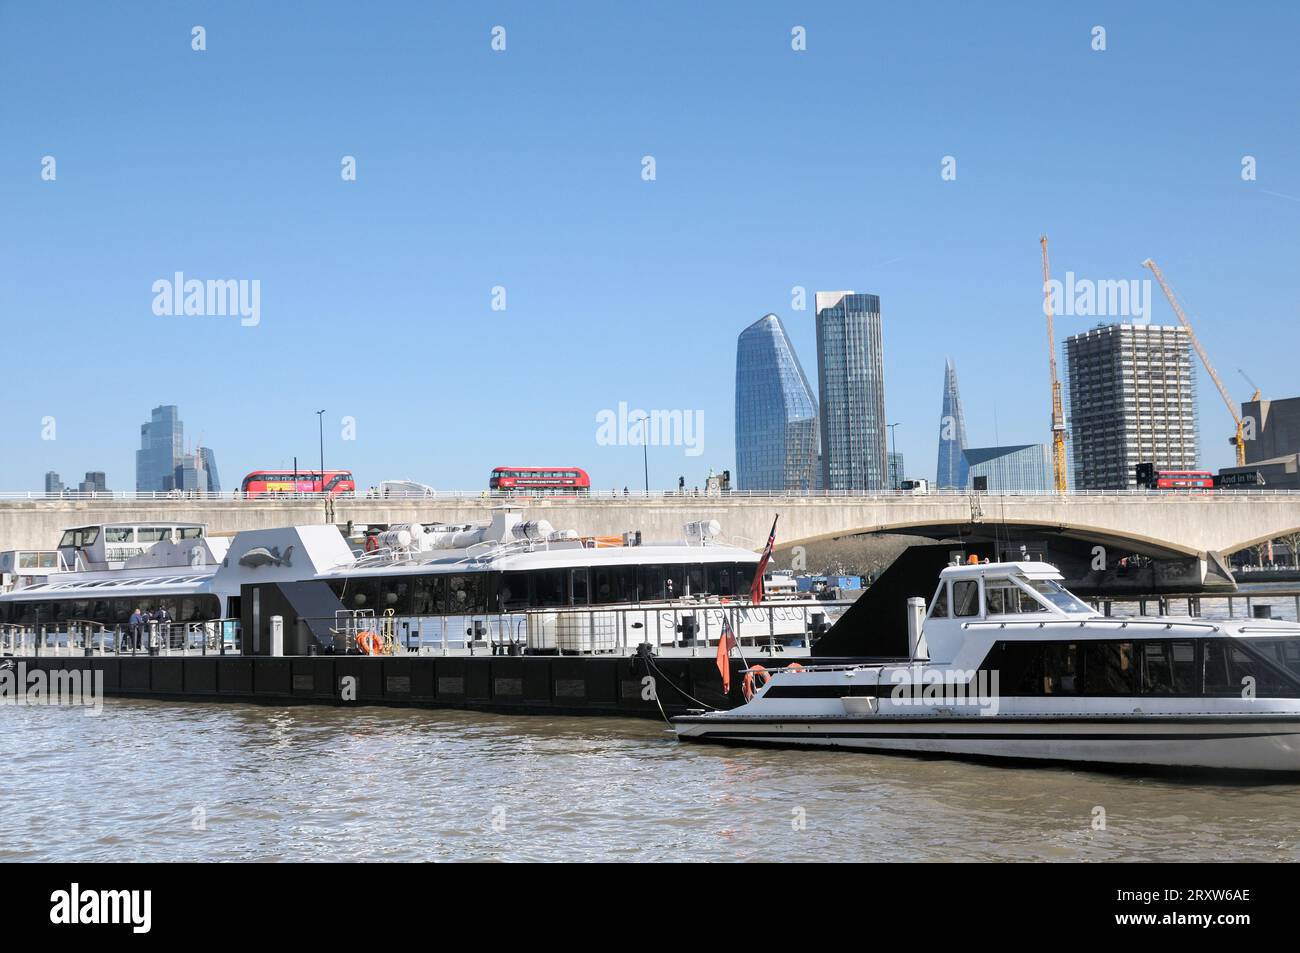 View from Victoria Embankment on a sunny day with boats on River Thames, skyscrapers on London skyline and red buses crossing Waterloo Bridge. UK Stock Photo